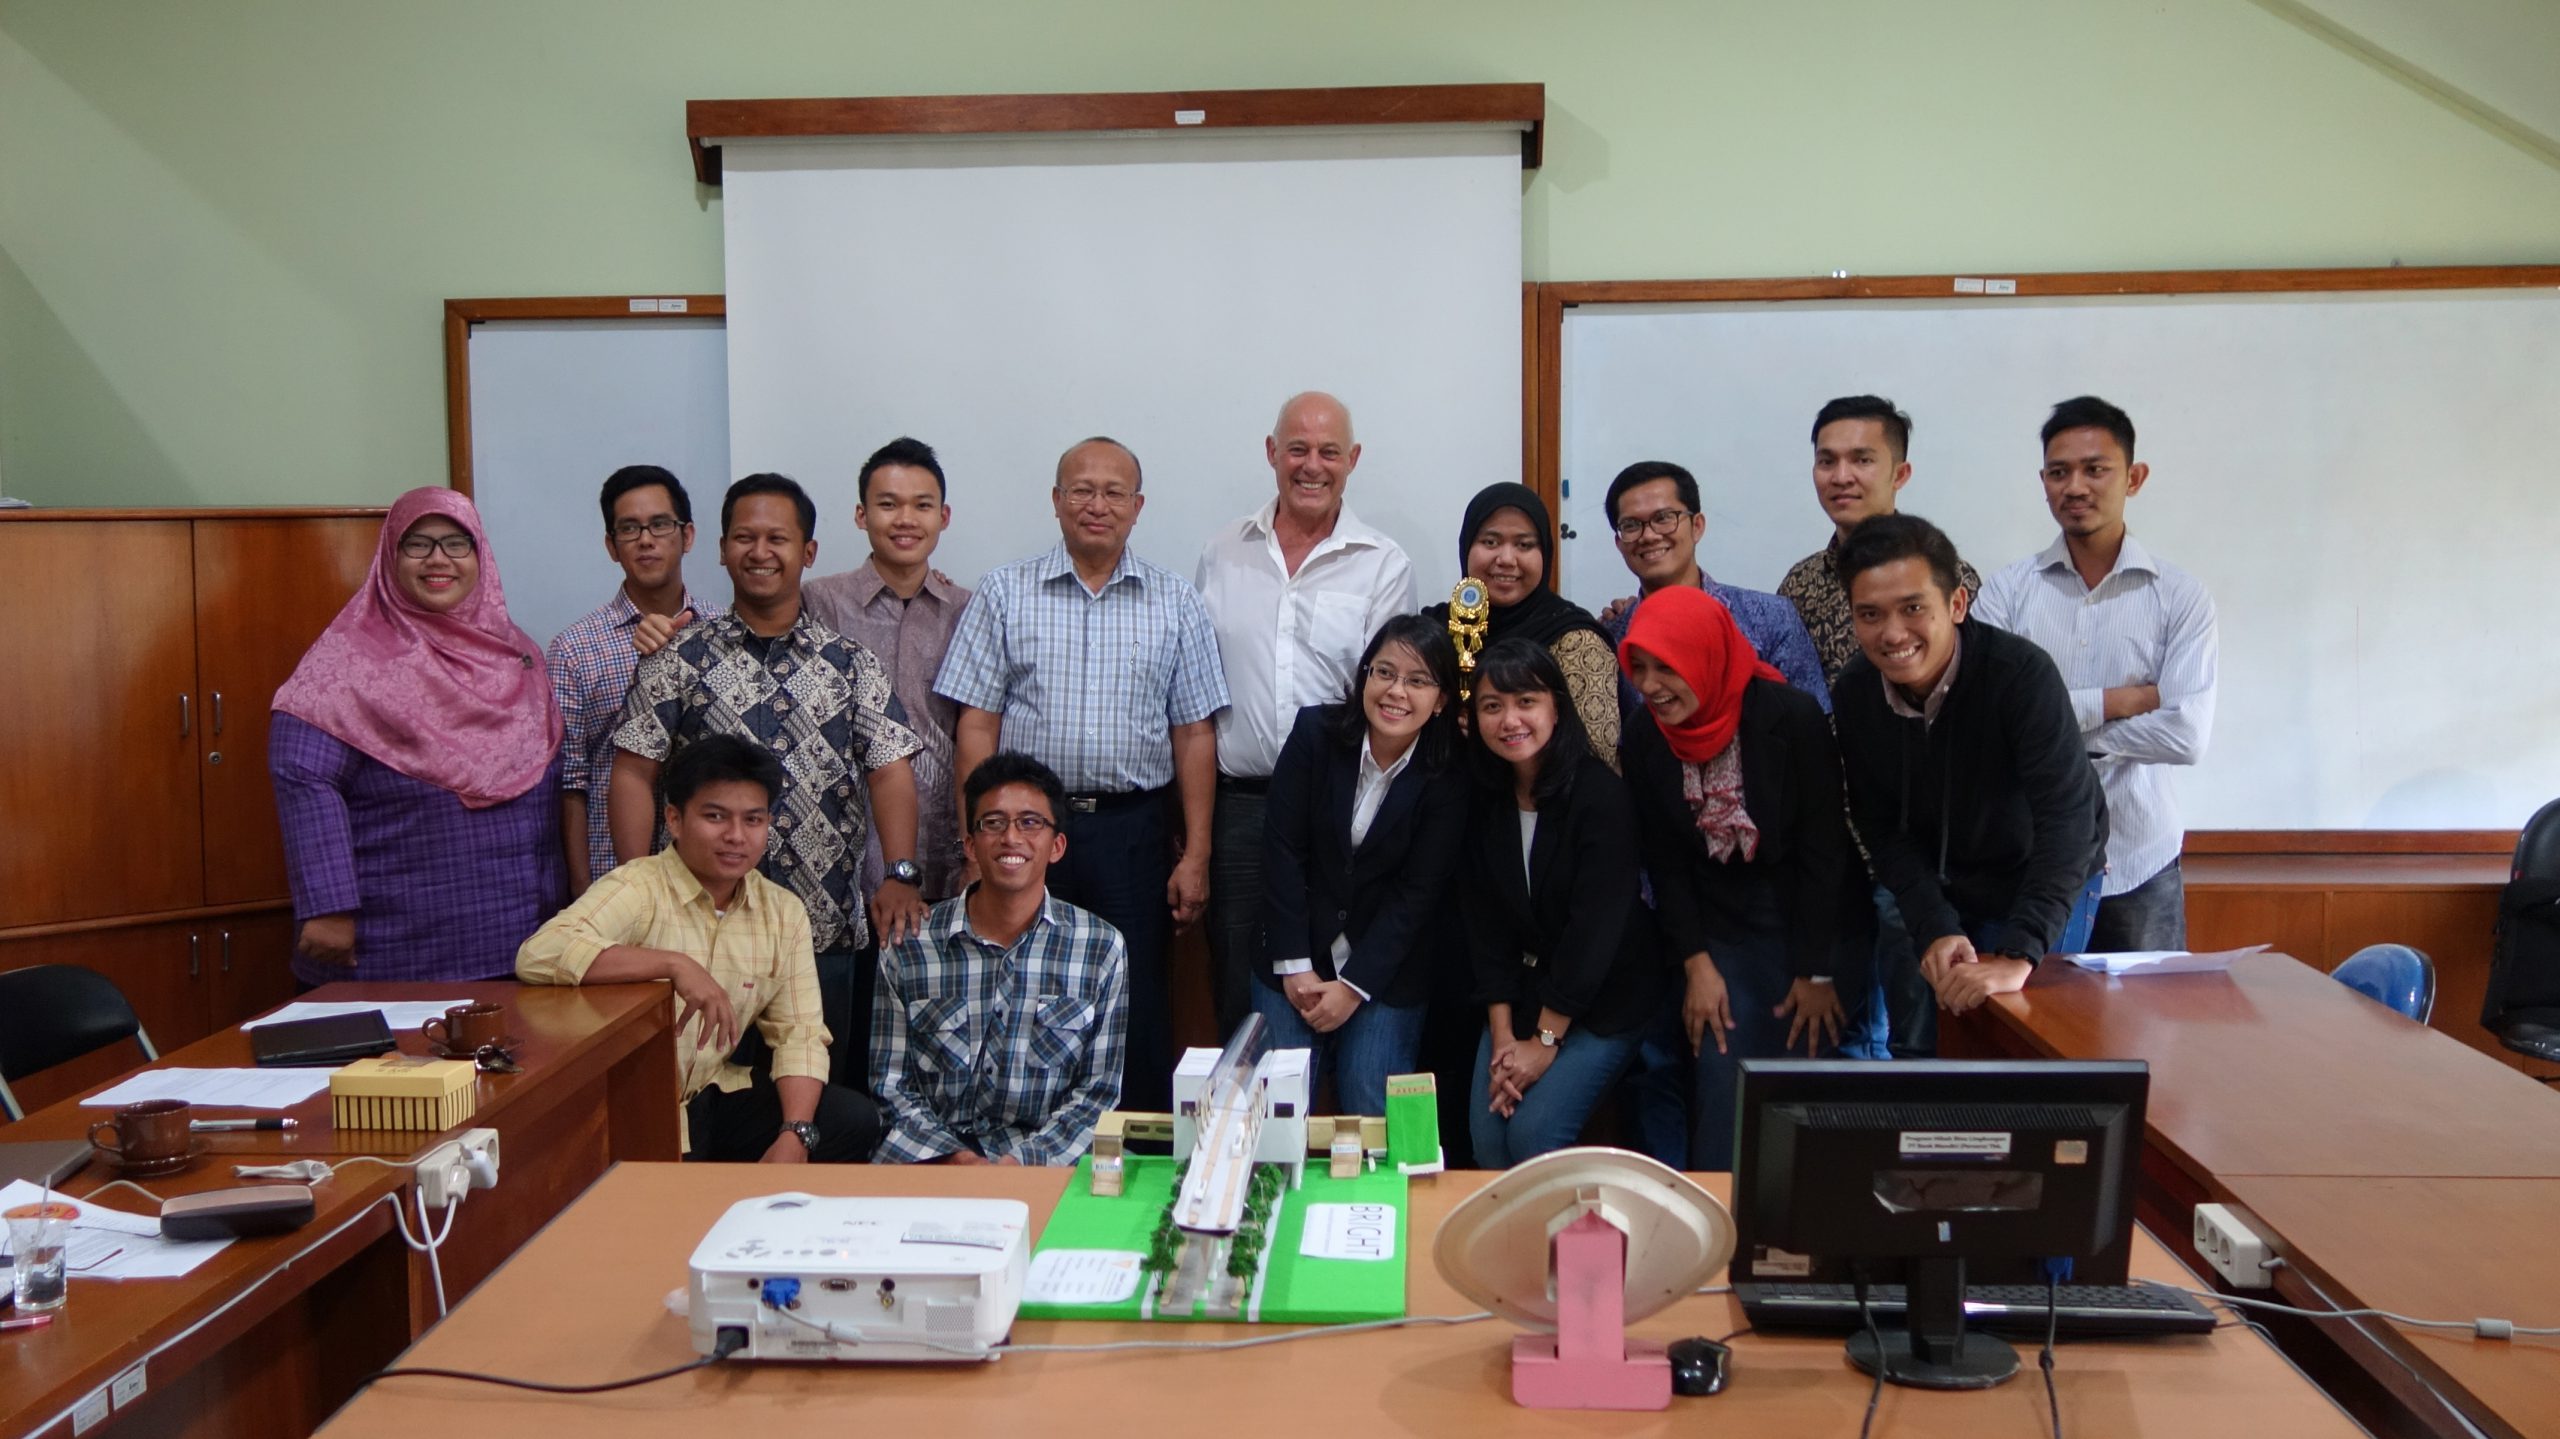 Barry Jones (center, in white shirt) with faculty and students at Ho Chi Minh University of Technology and Education